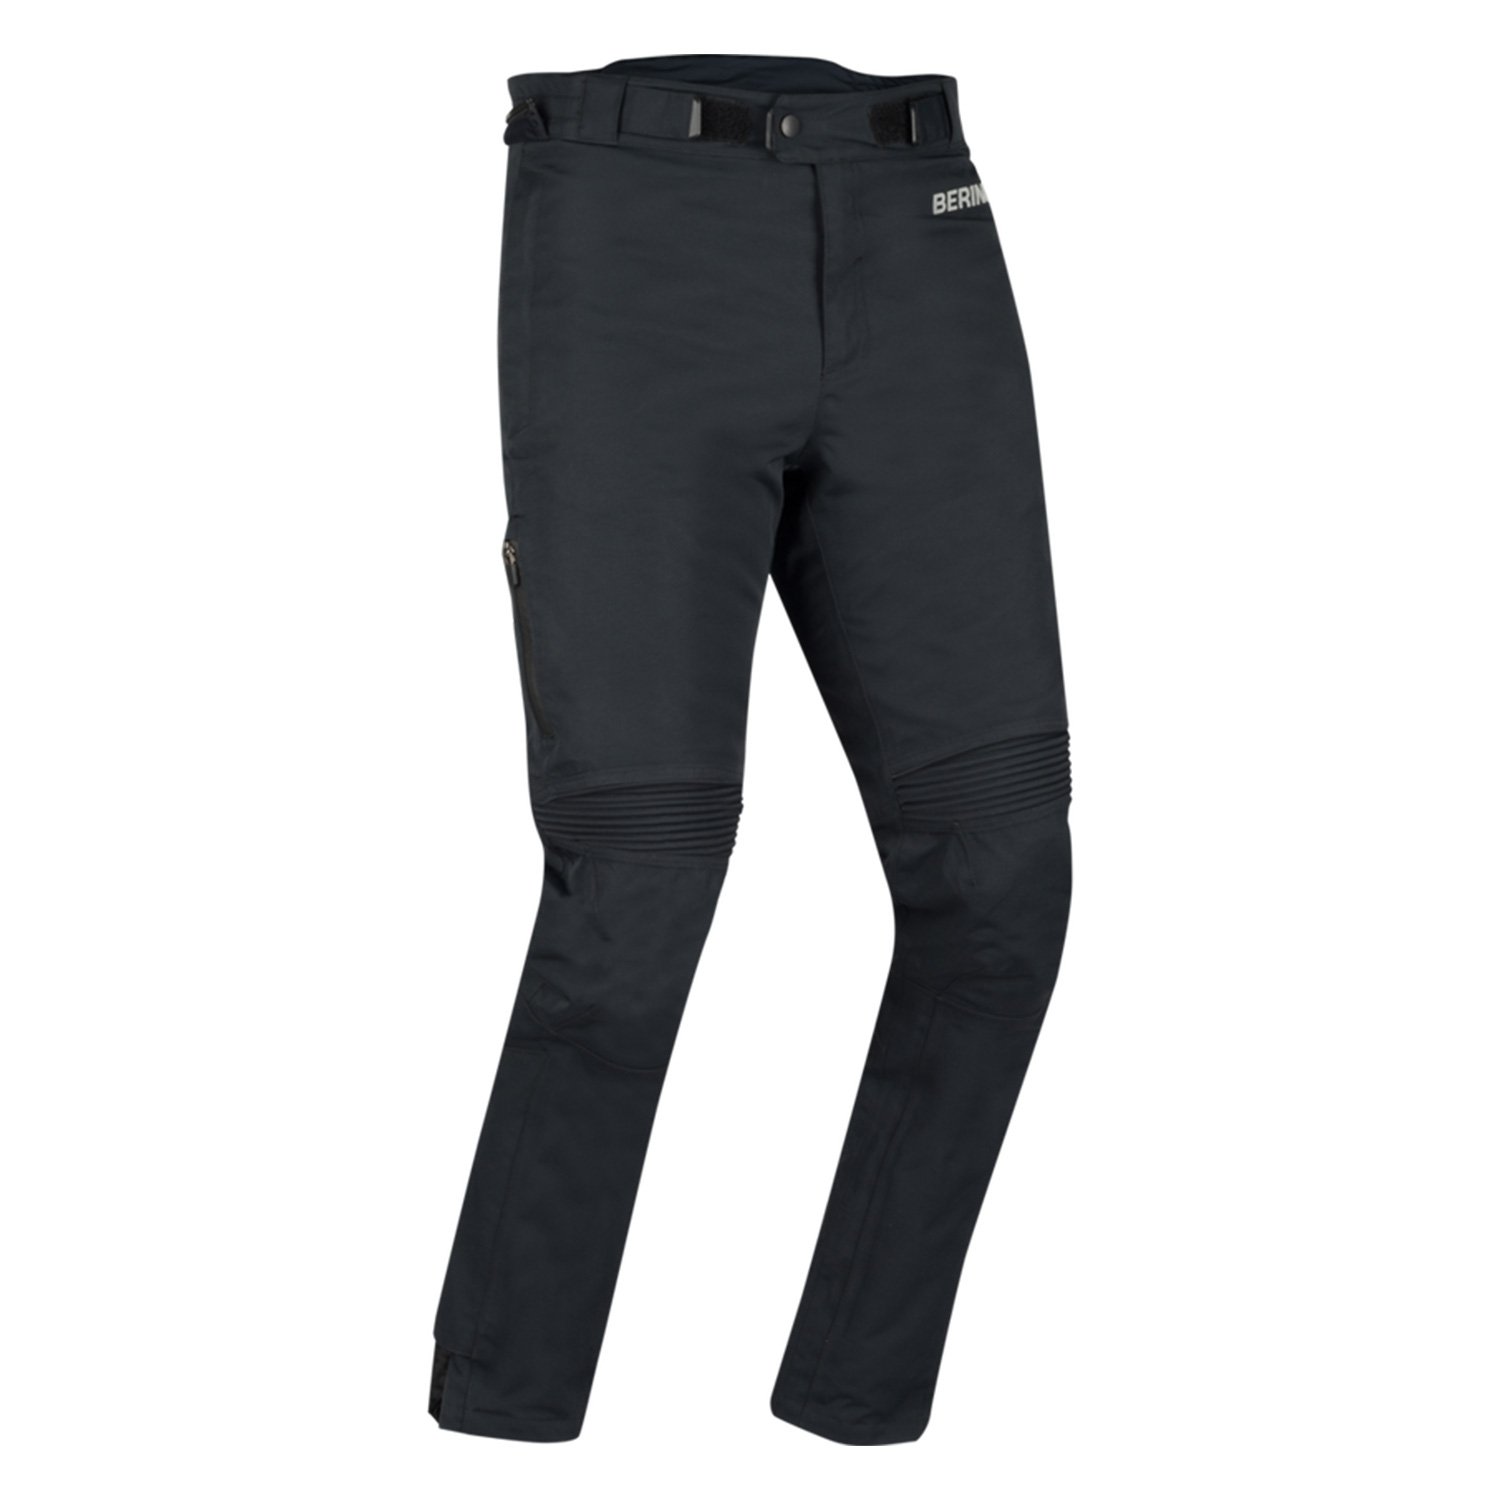 Image of Bering Zephyr Trousers Black Size S ID 3660815180747